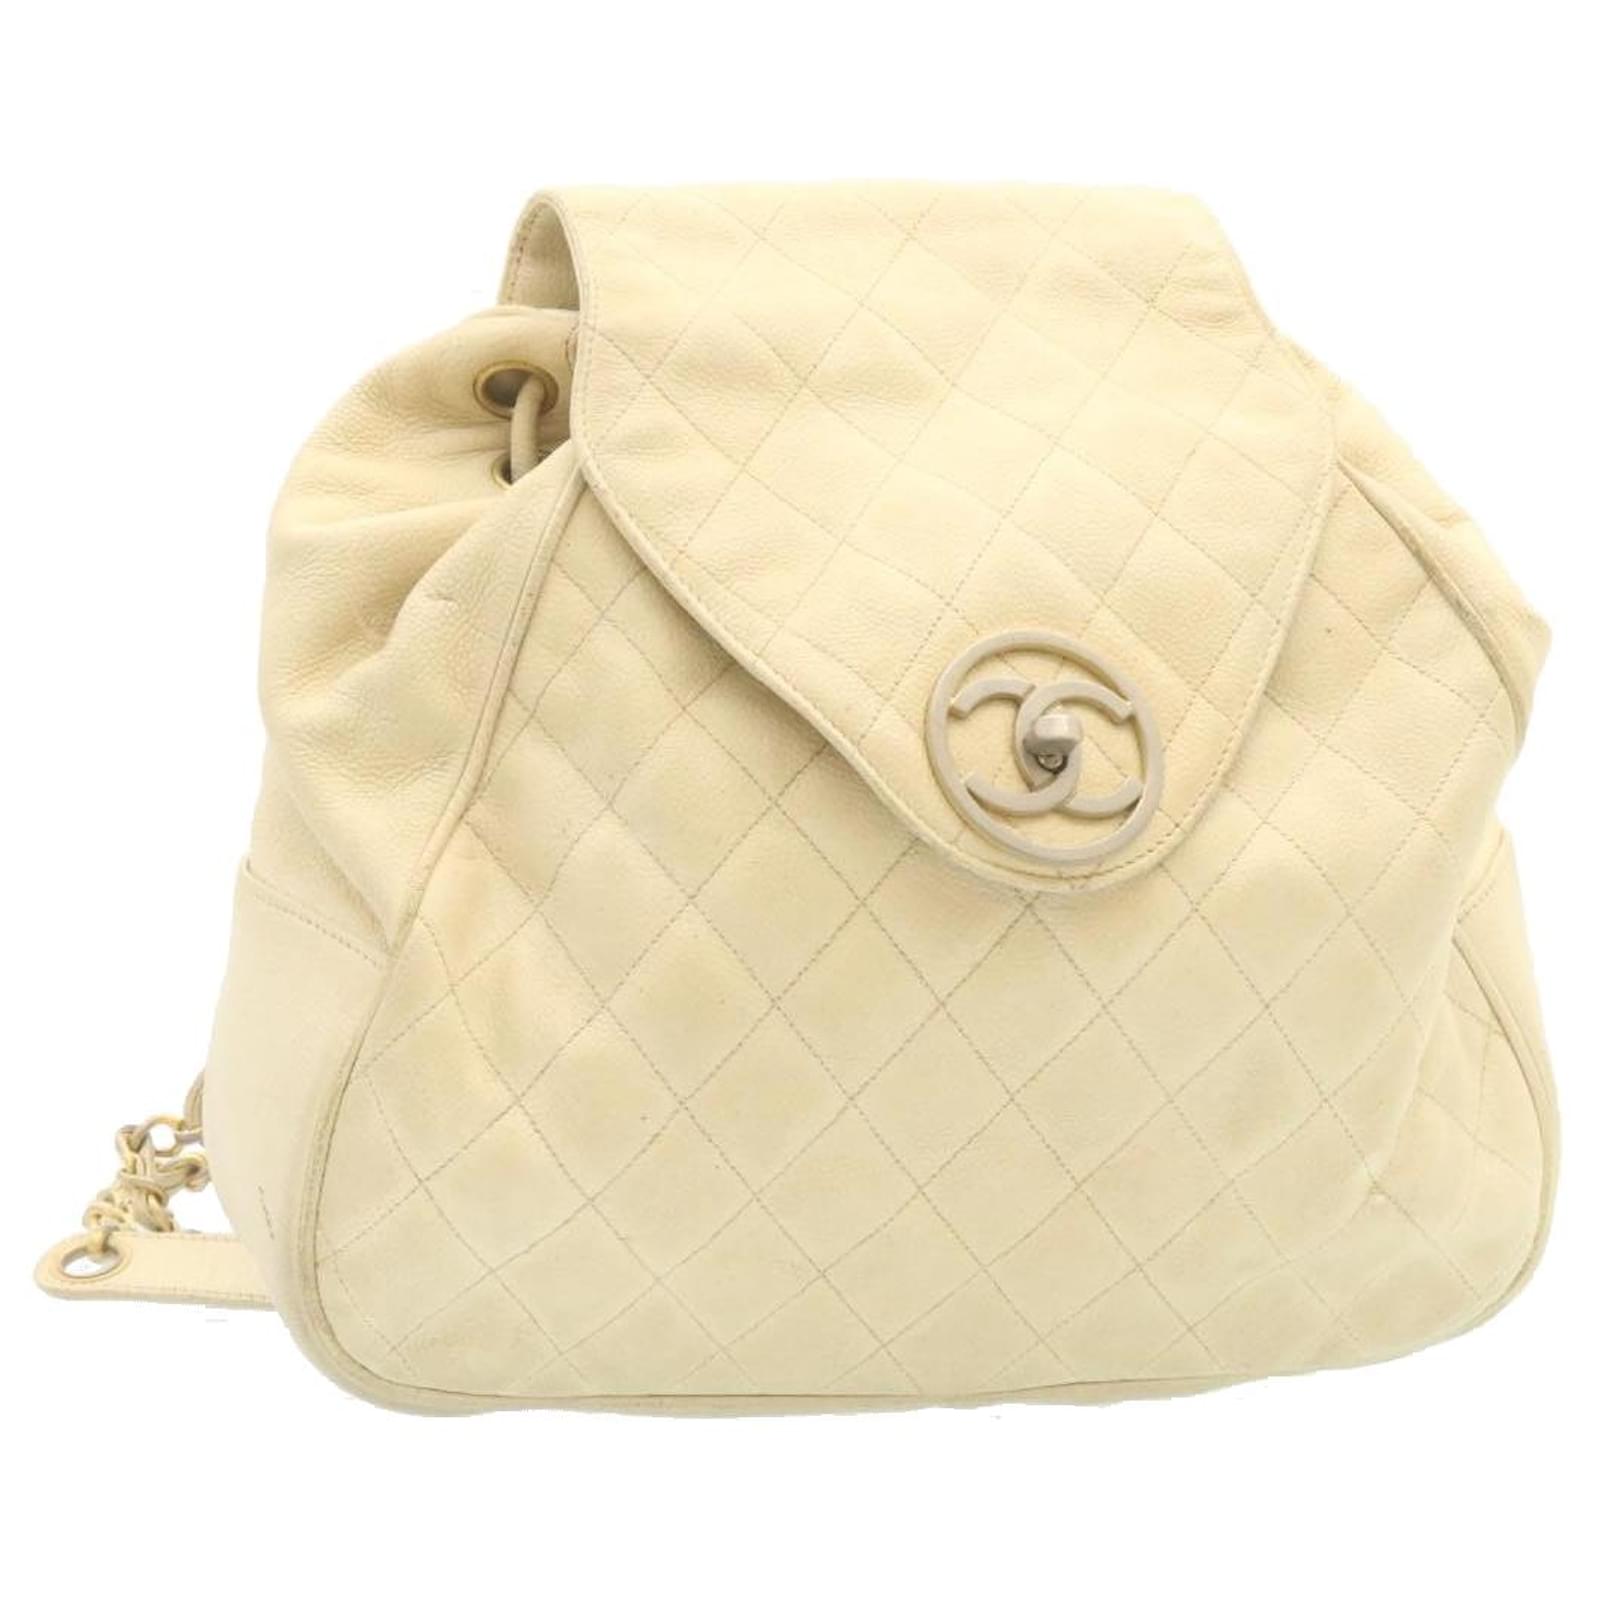 CHANEL Vintage Matelasse Quilted Lambskin Camera Bag - More Than